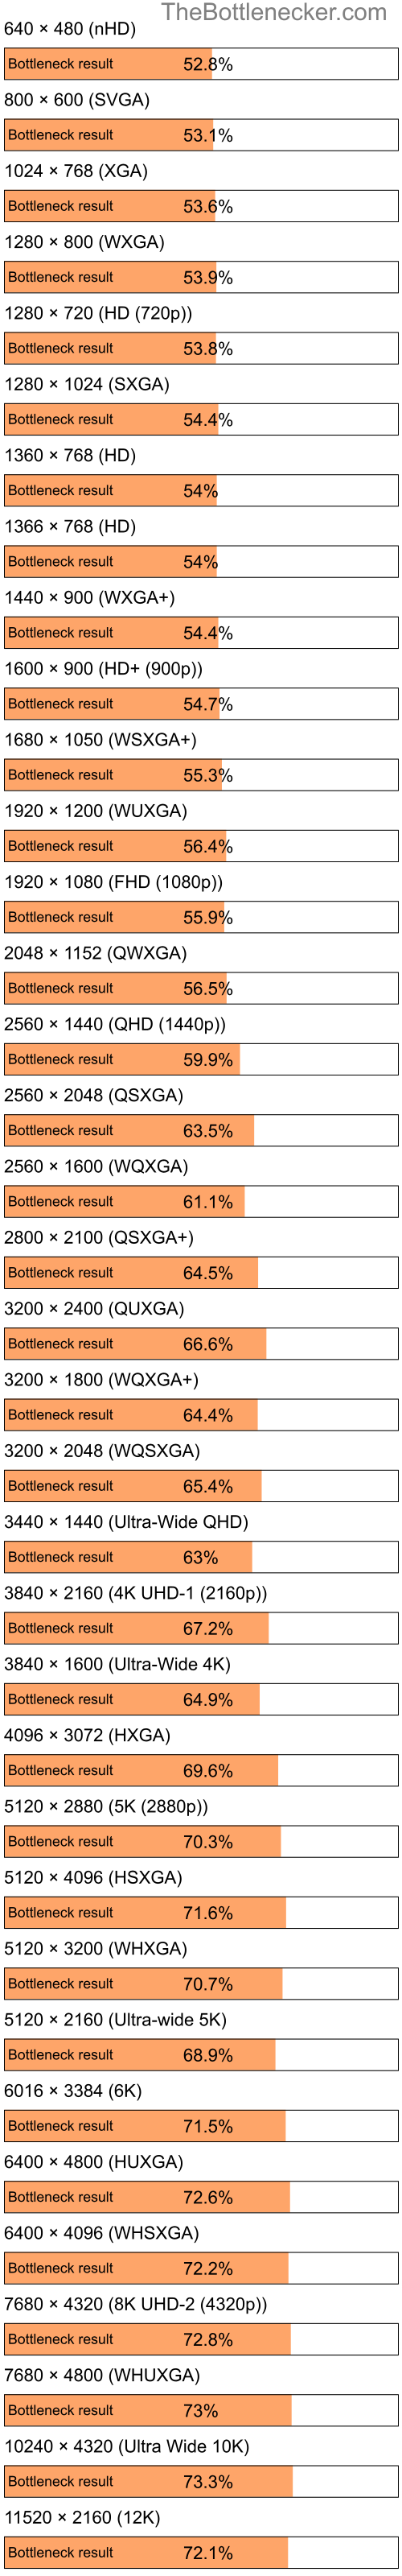 Bottleneck results by resolution for Intel Atom Z520 and NVIDIA Quadro NVS 130M in Processor Intense Tasks